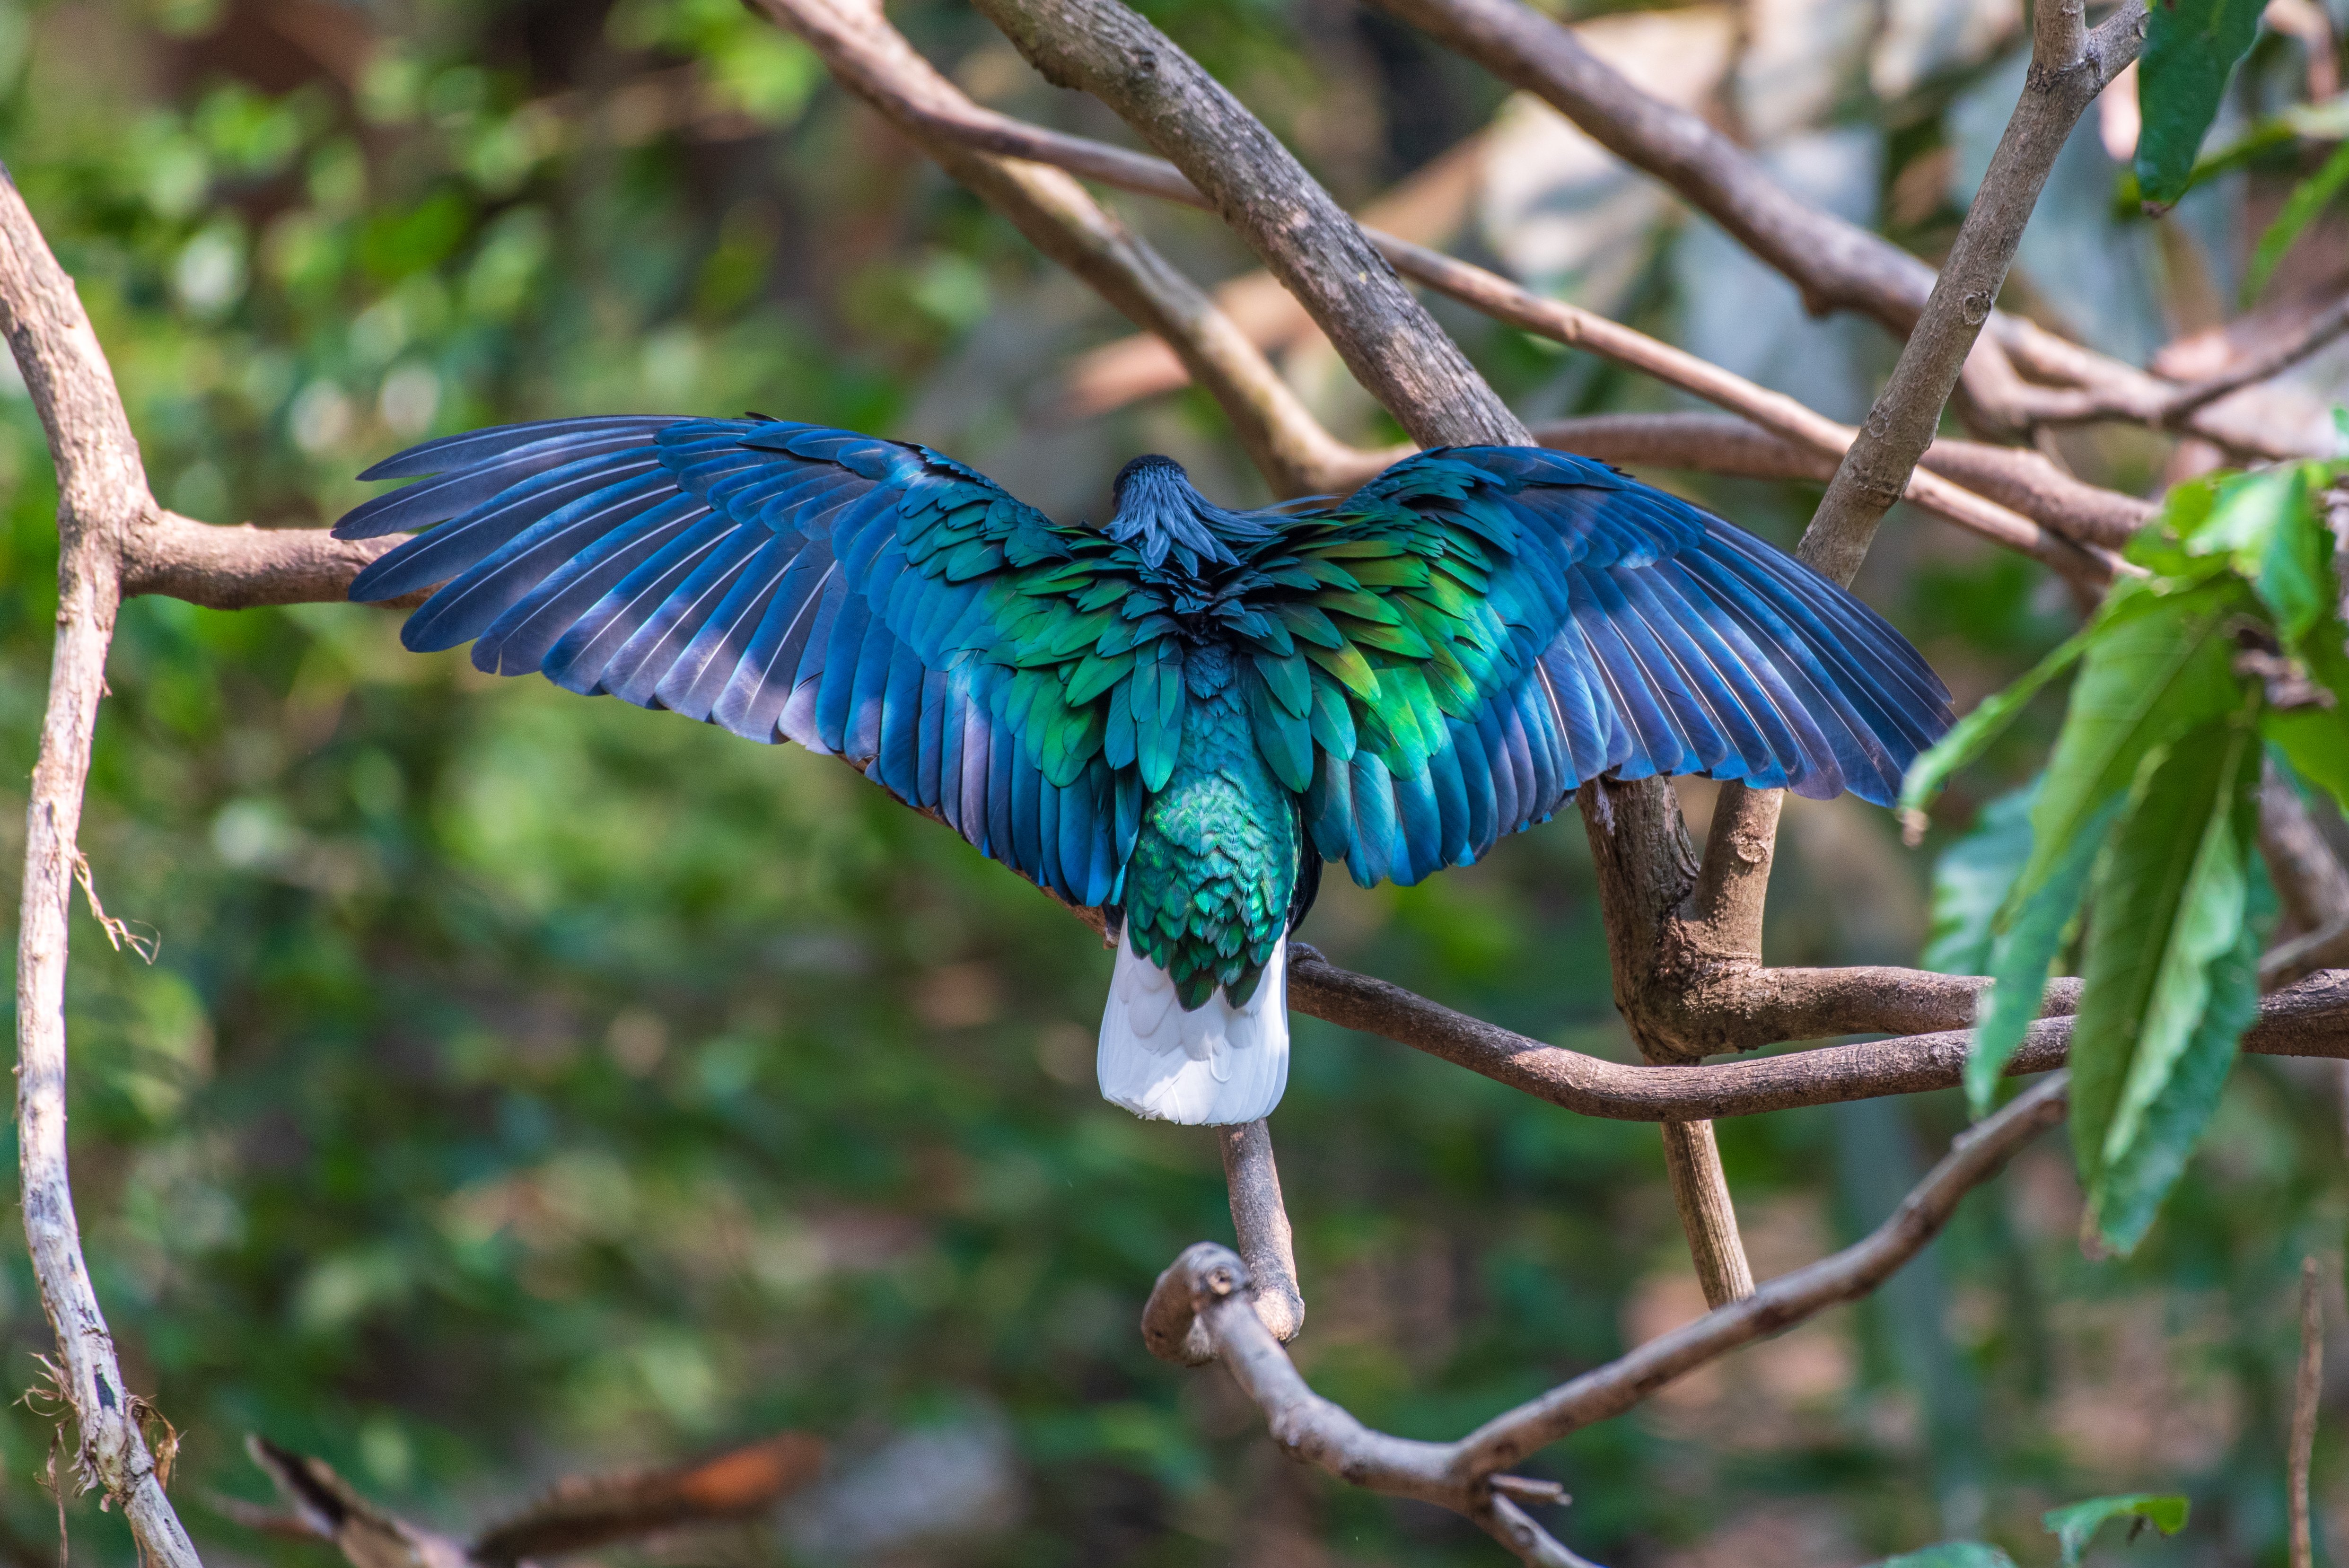 A Nicobar pigeon pictured spreading its wings. | Source: Shutterstock